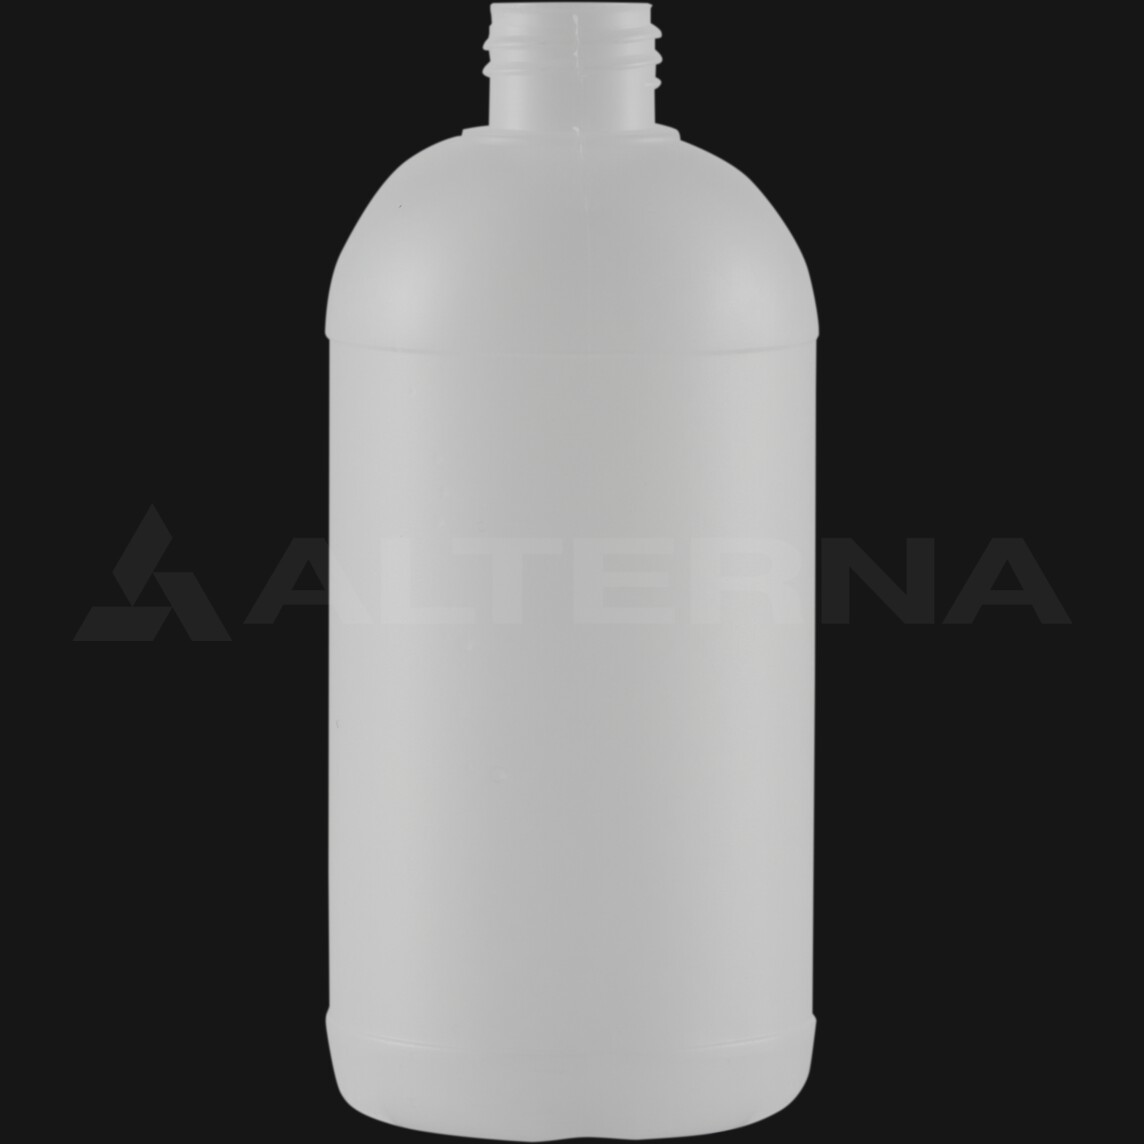 1-40 500ml White HDPE Plastic Bottles with 28mm Trigger Spray Screw Caps 